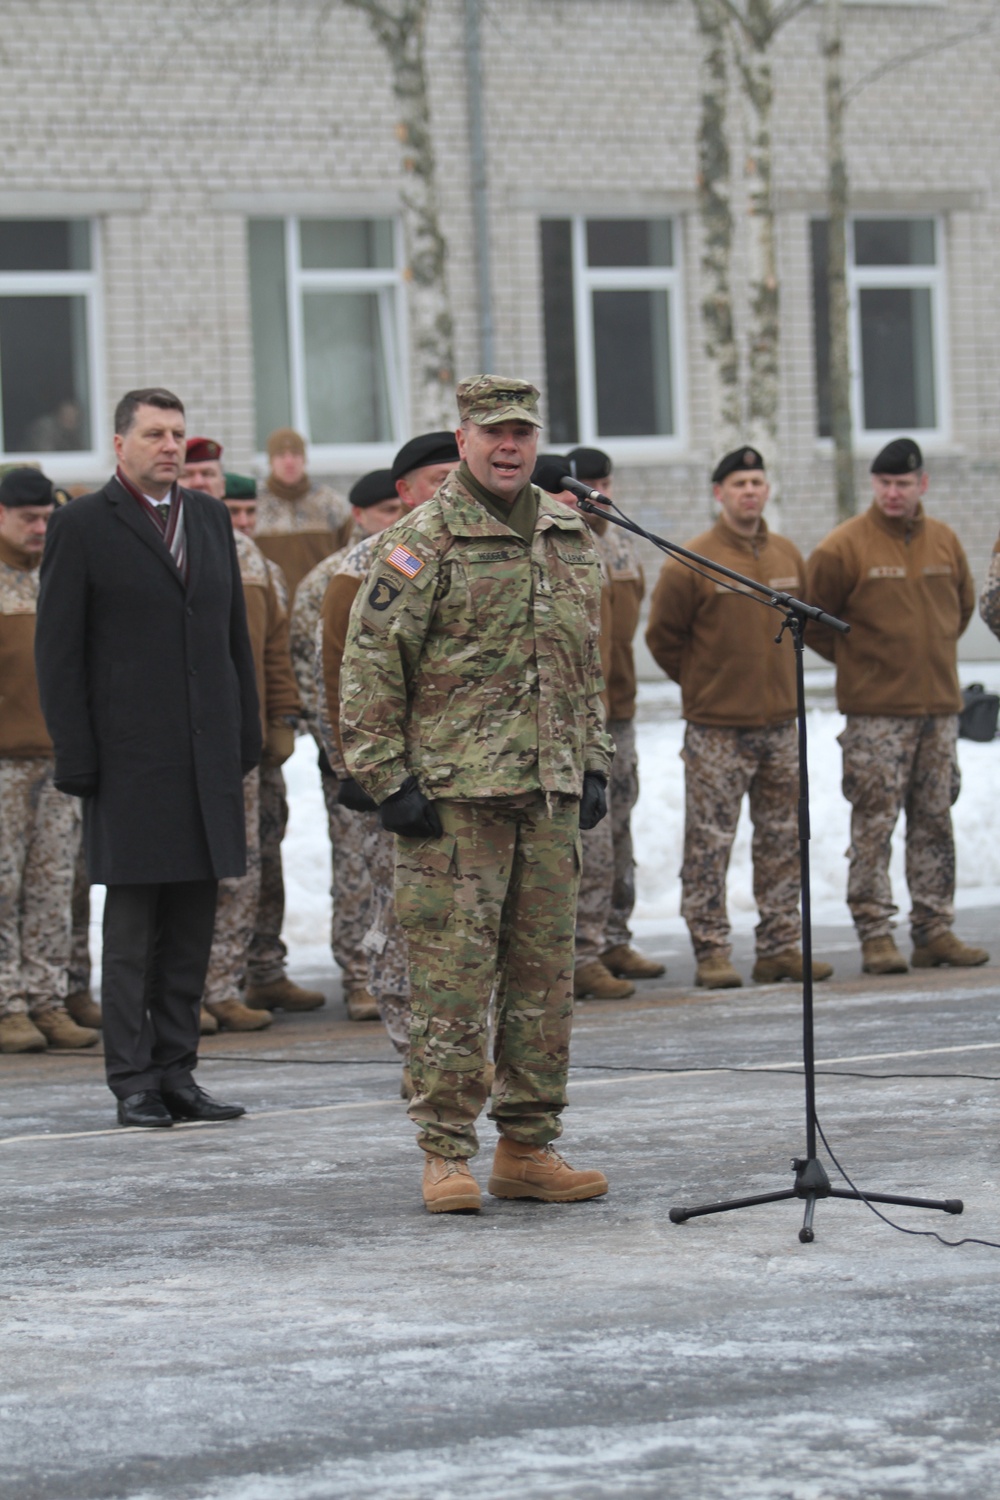 Latvian welcomes the Dragoons